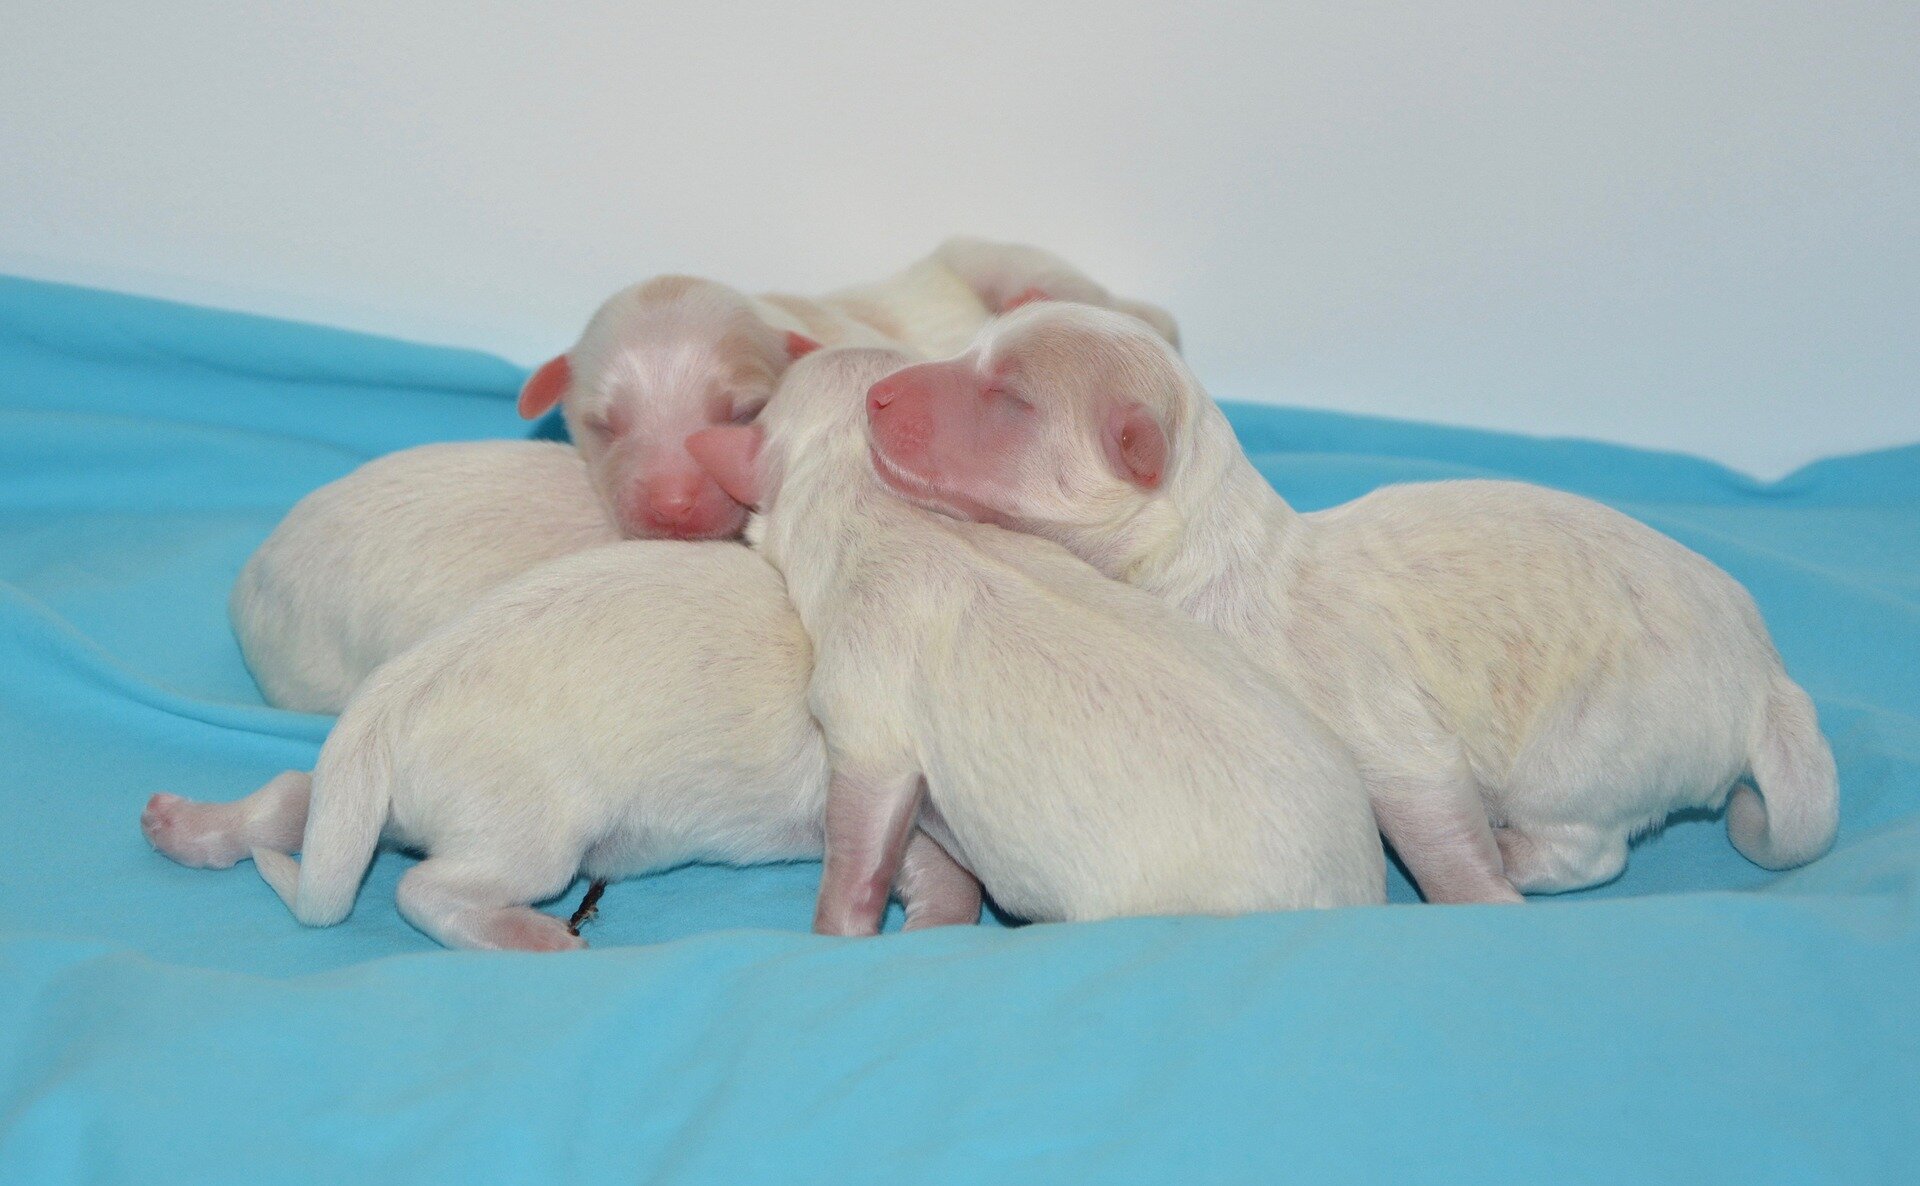 newborn puppies with eyes closed on blue cover